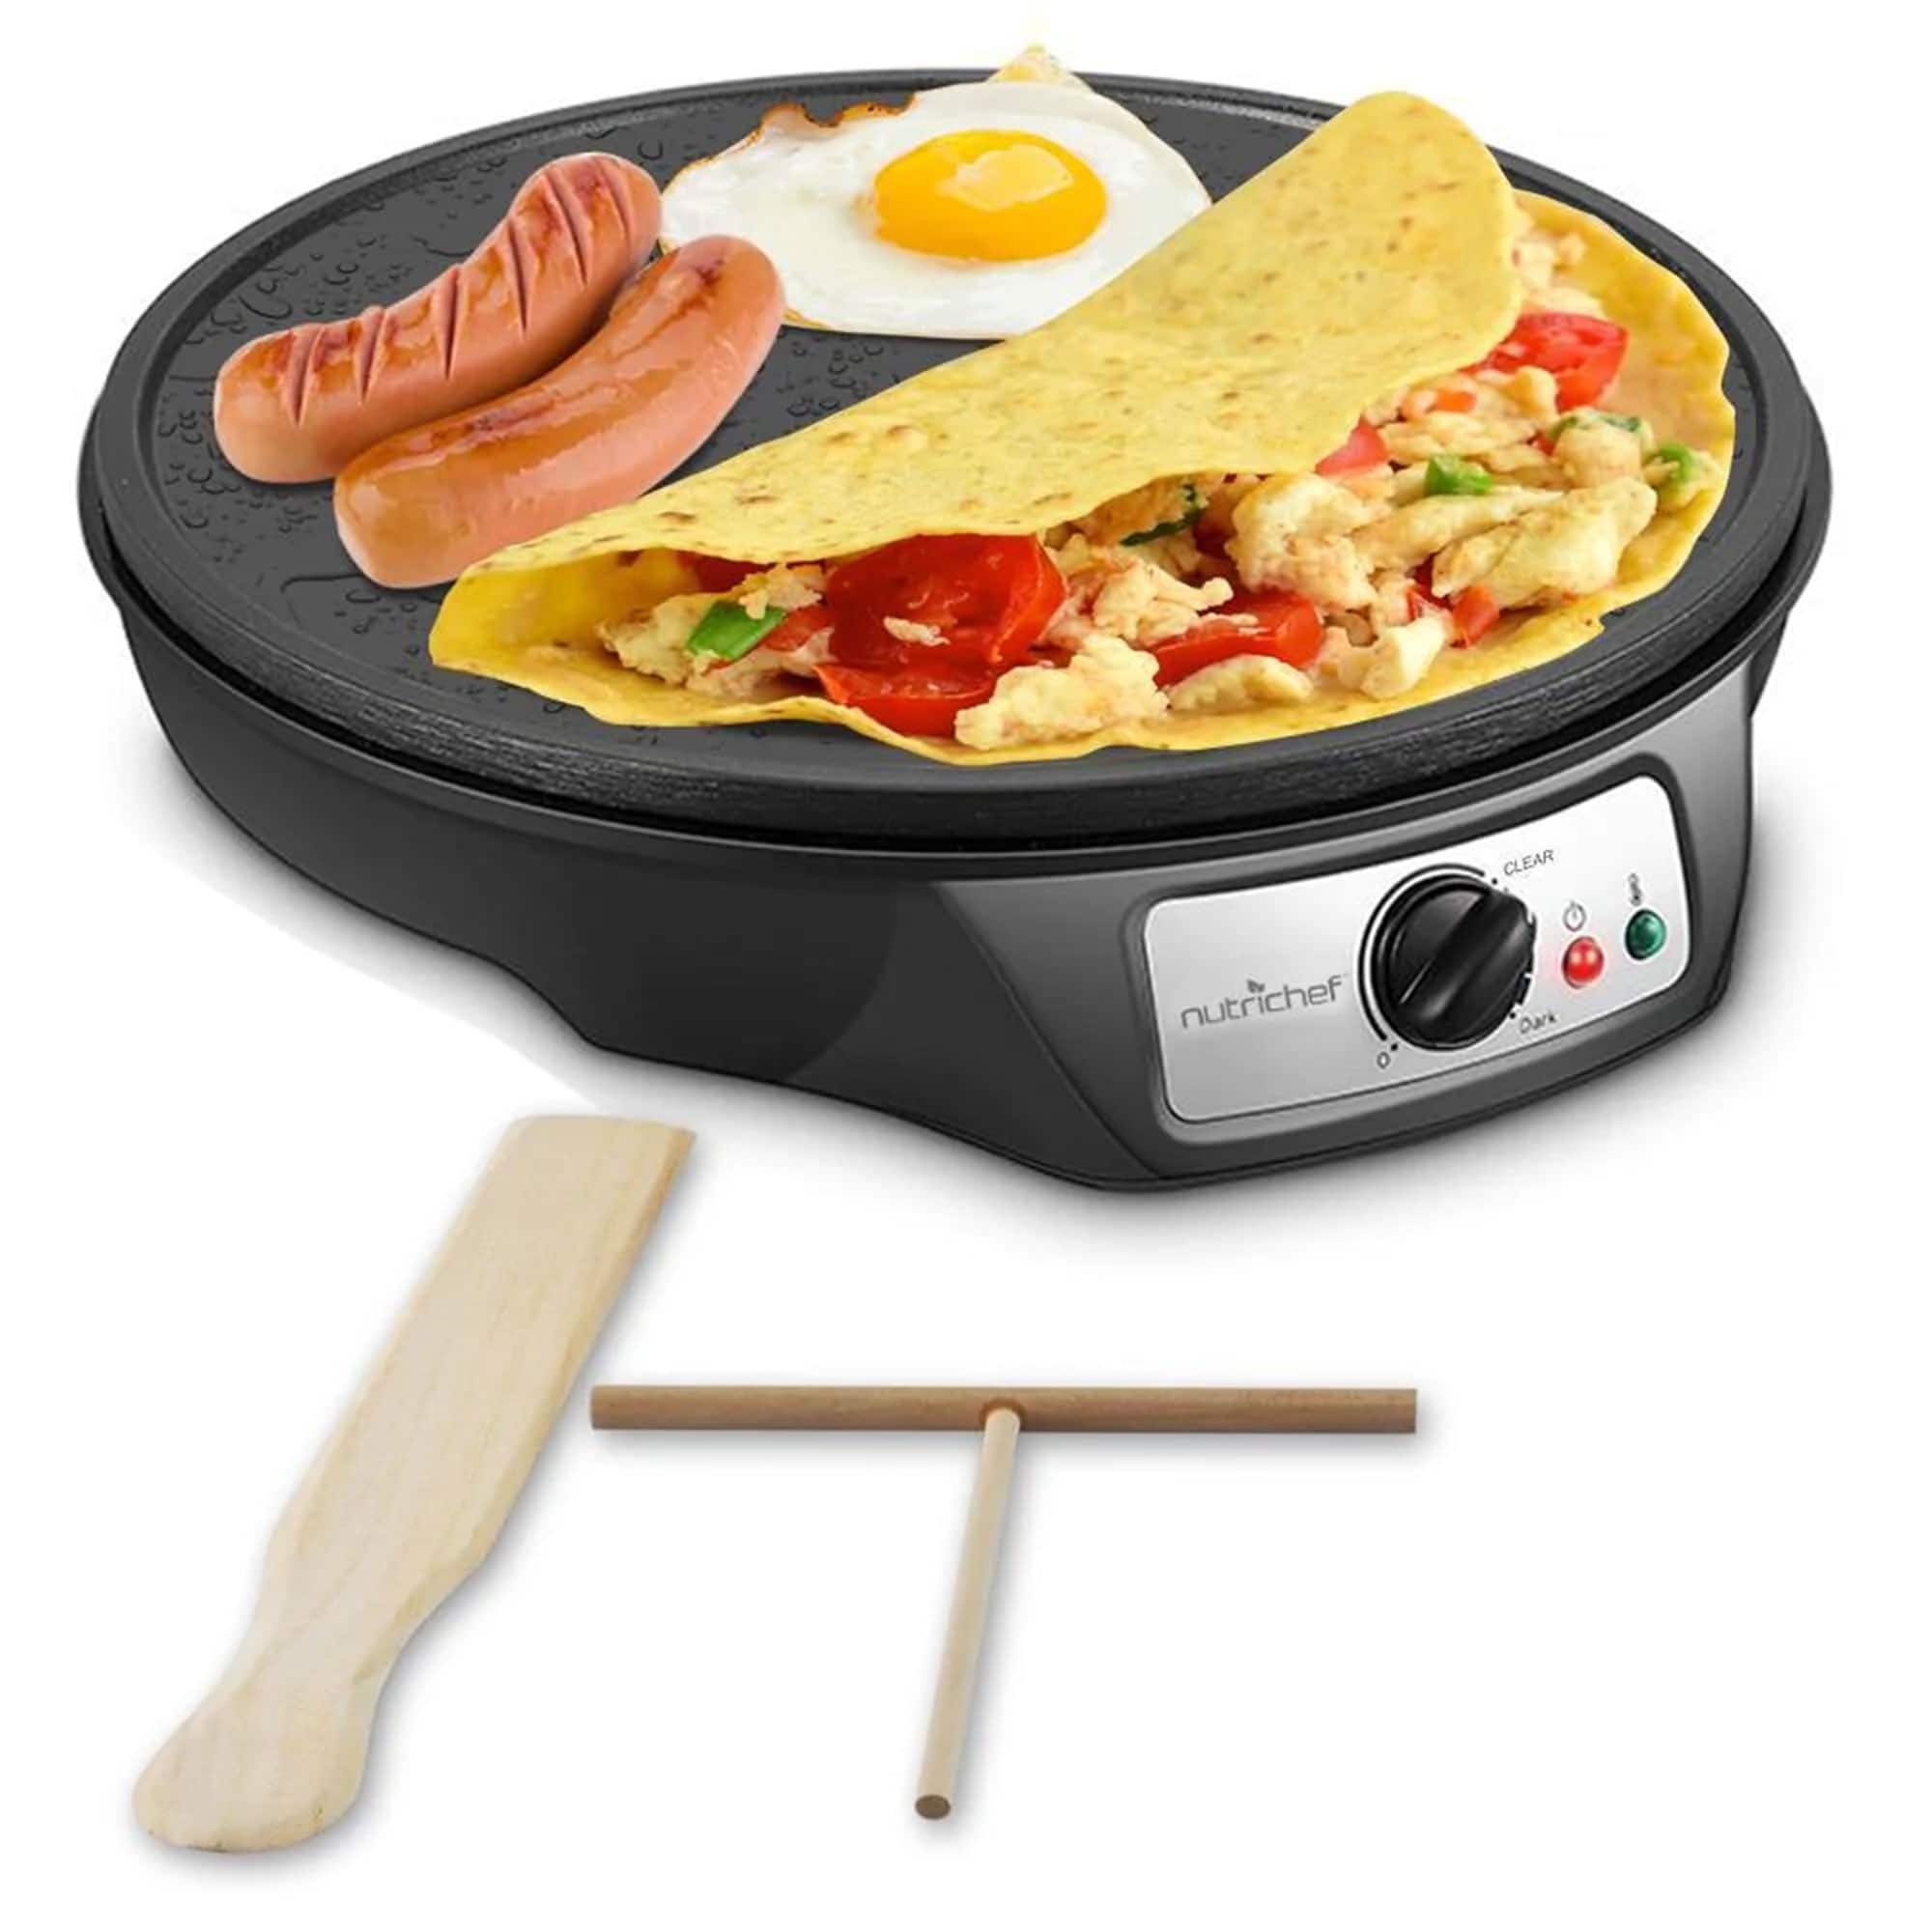 https://ak1.ostkcdn.com/images/products/is/images/direct/092745441b80b1268deb6d12e372461f969759b0/NutriChef-Electric-Nonstick-Griddle-Crepe-Injera-Maker-Hot-Plate-Cooktop%2C-Black.jpg